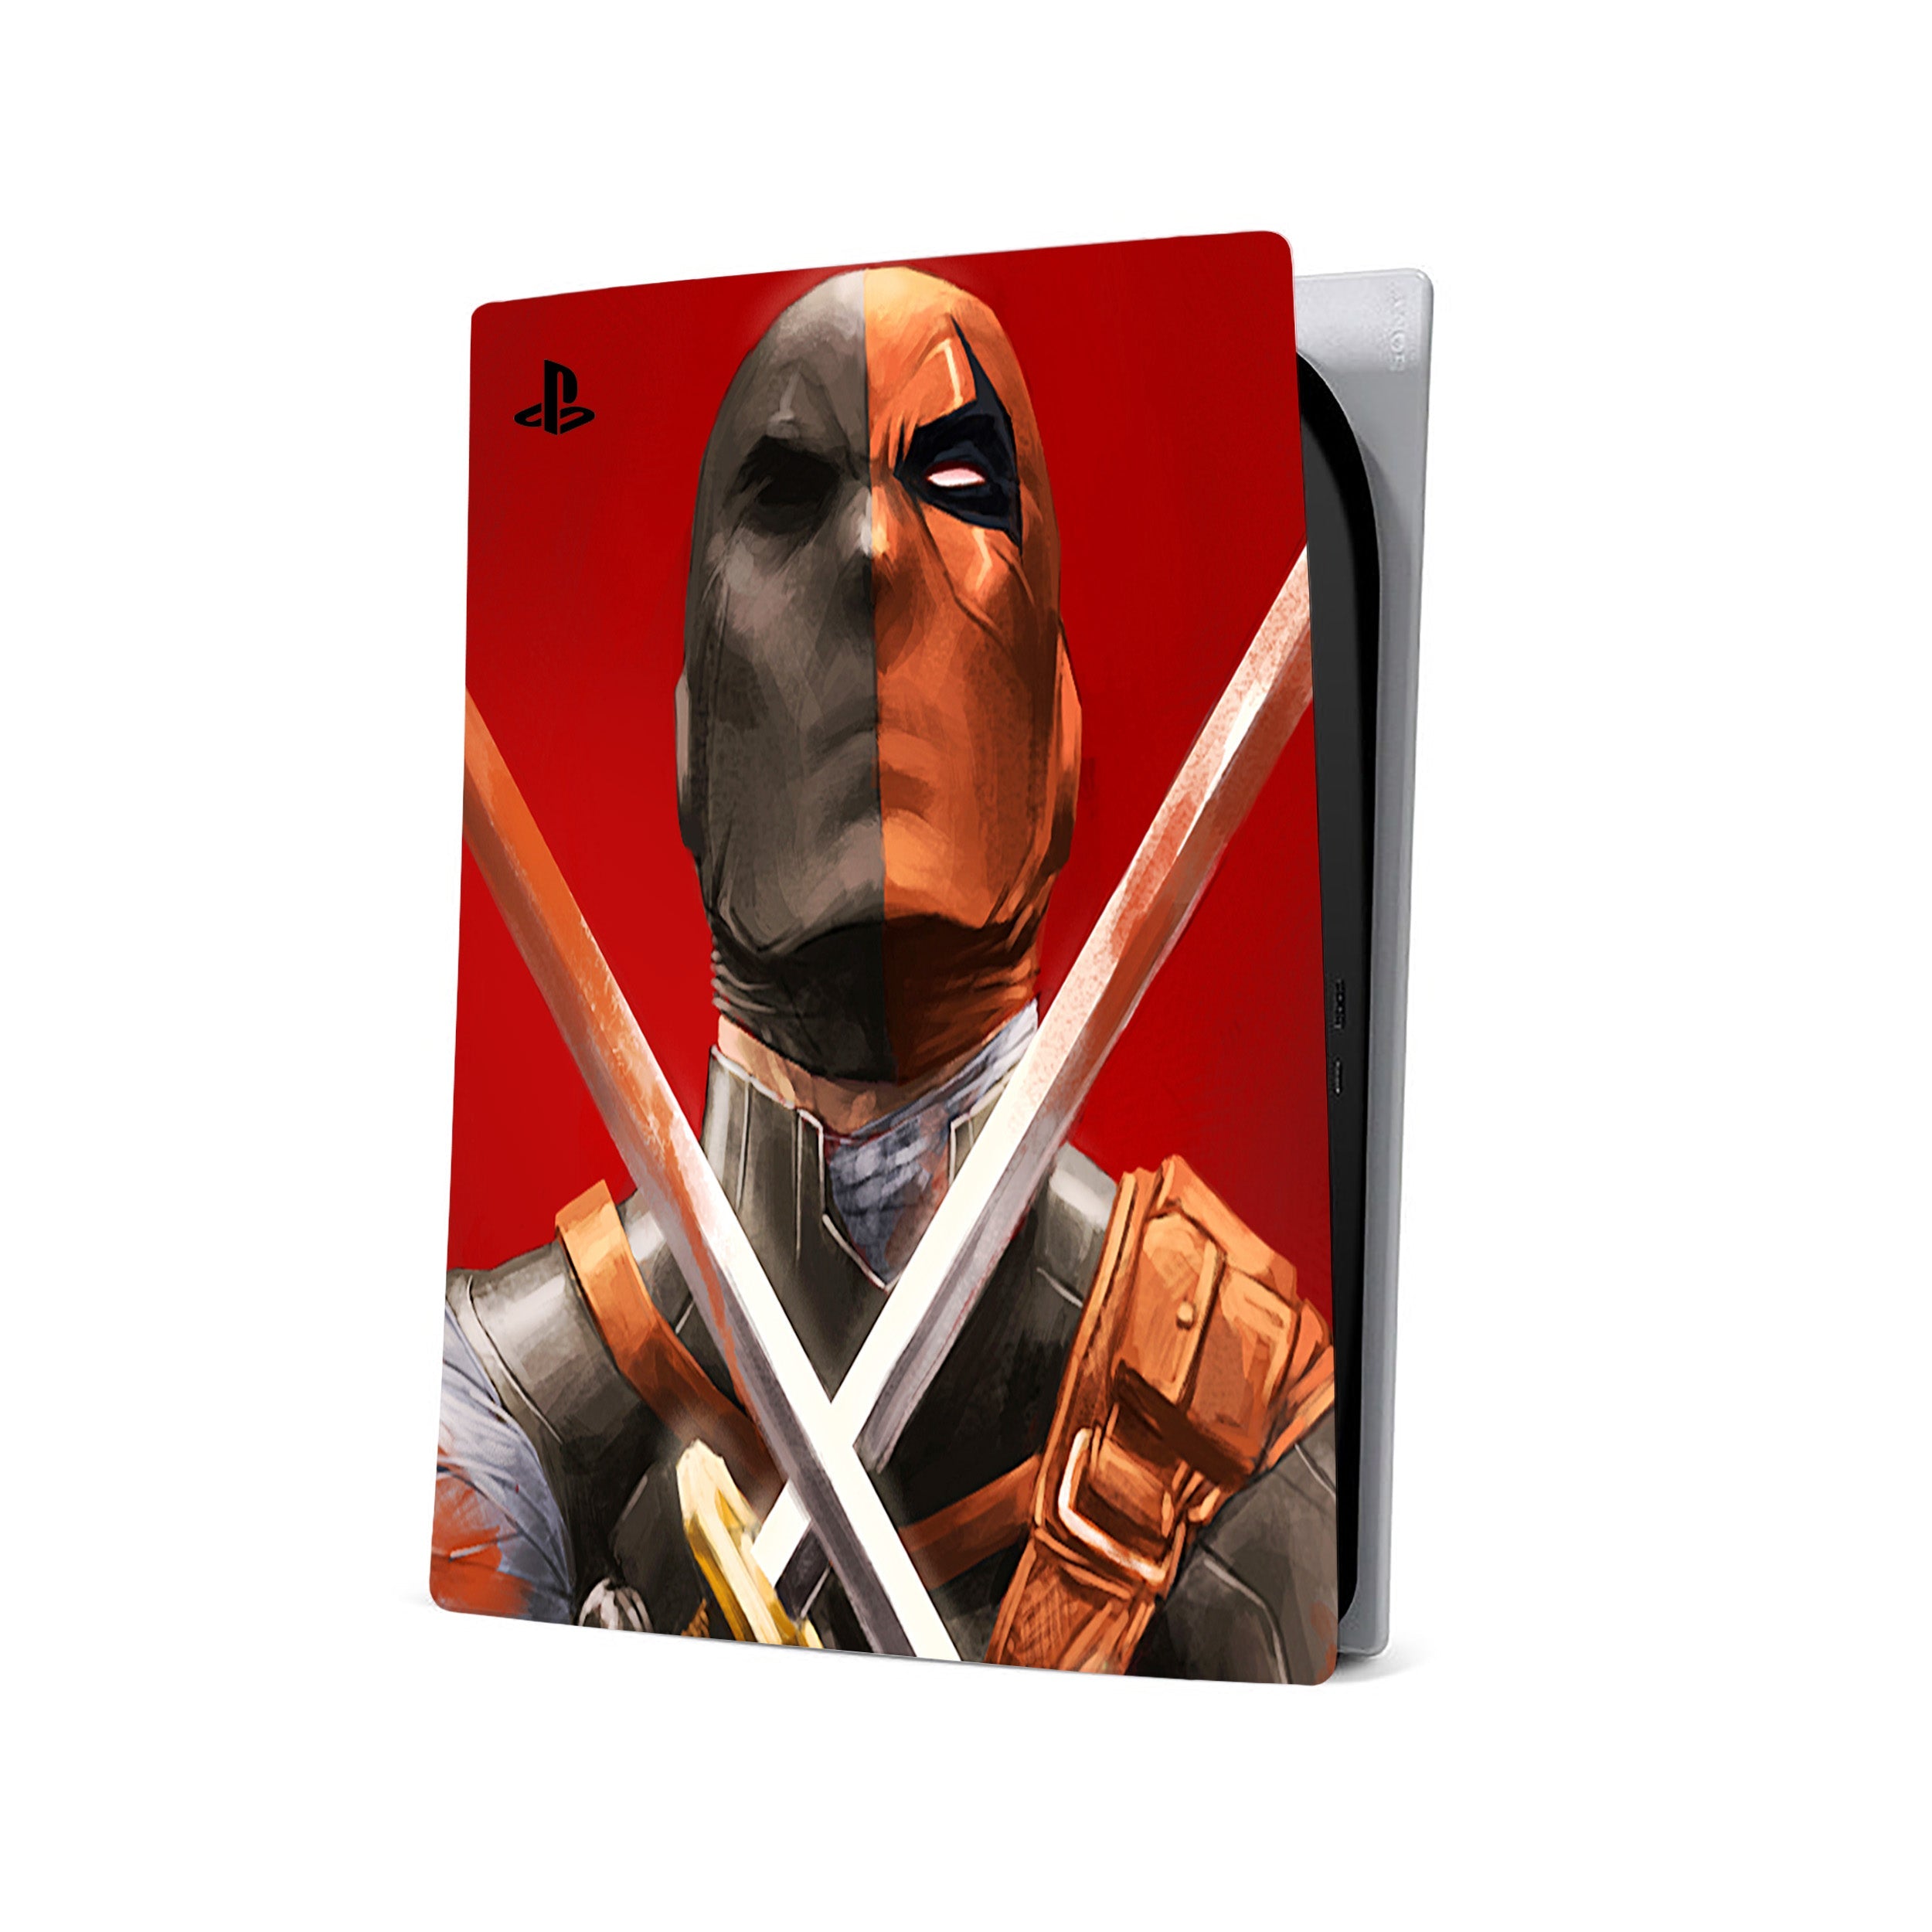 A video game skin featuring a DC Comics Deathstroke design for the PS5.